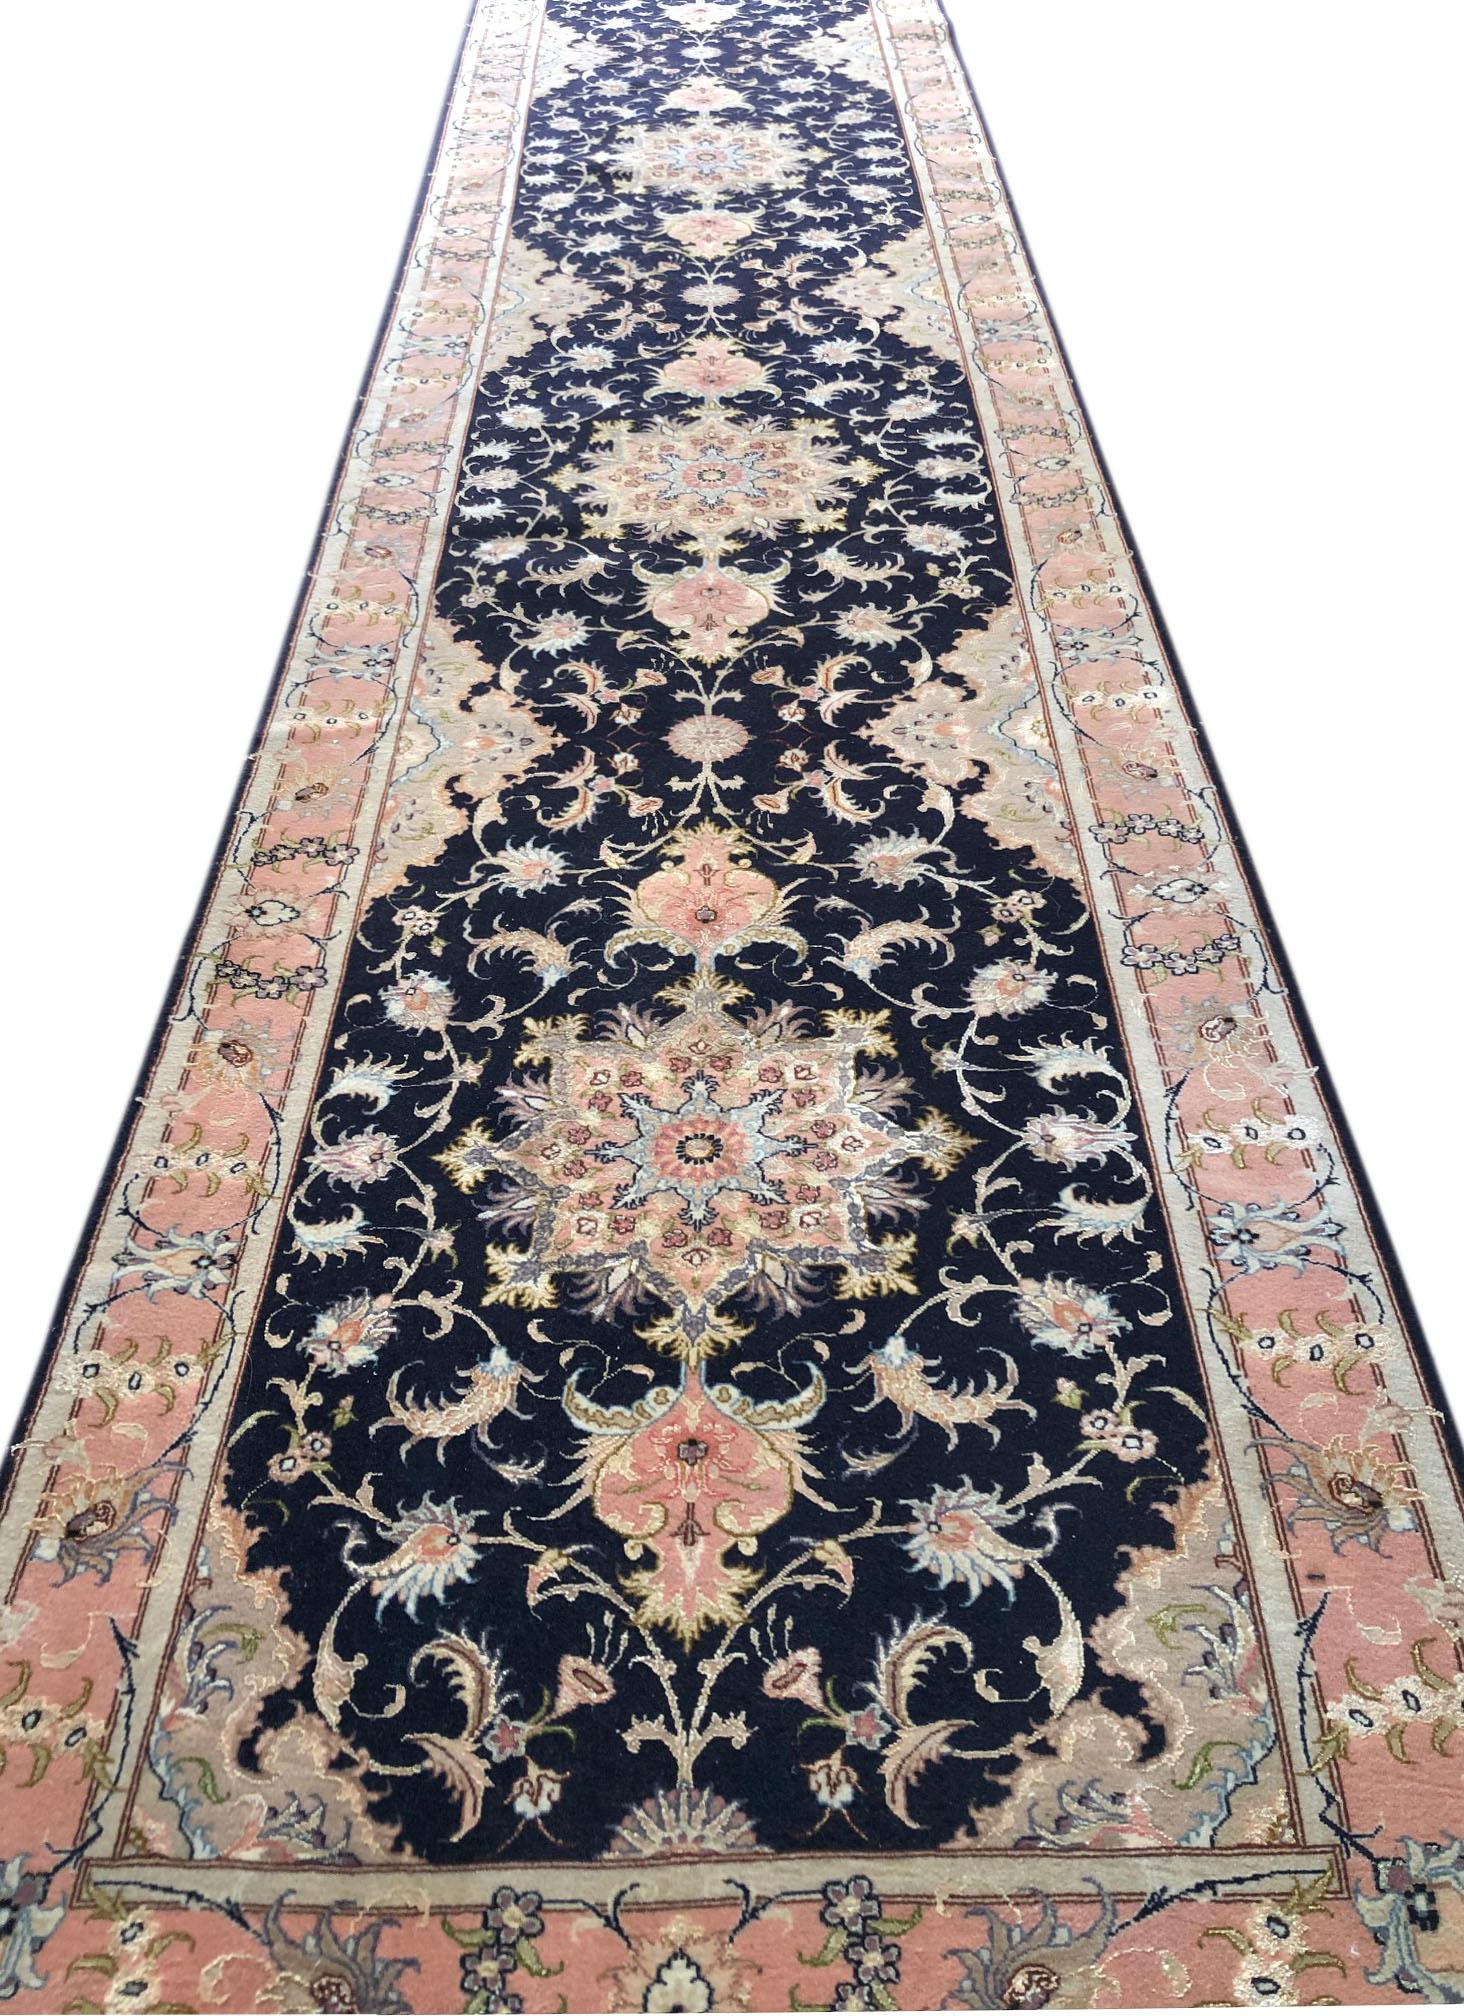 Wool Authentic Persian Hand Knotted Repeated Medallion Floral Tabriz Black Runner Rug For Sale